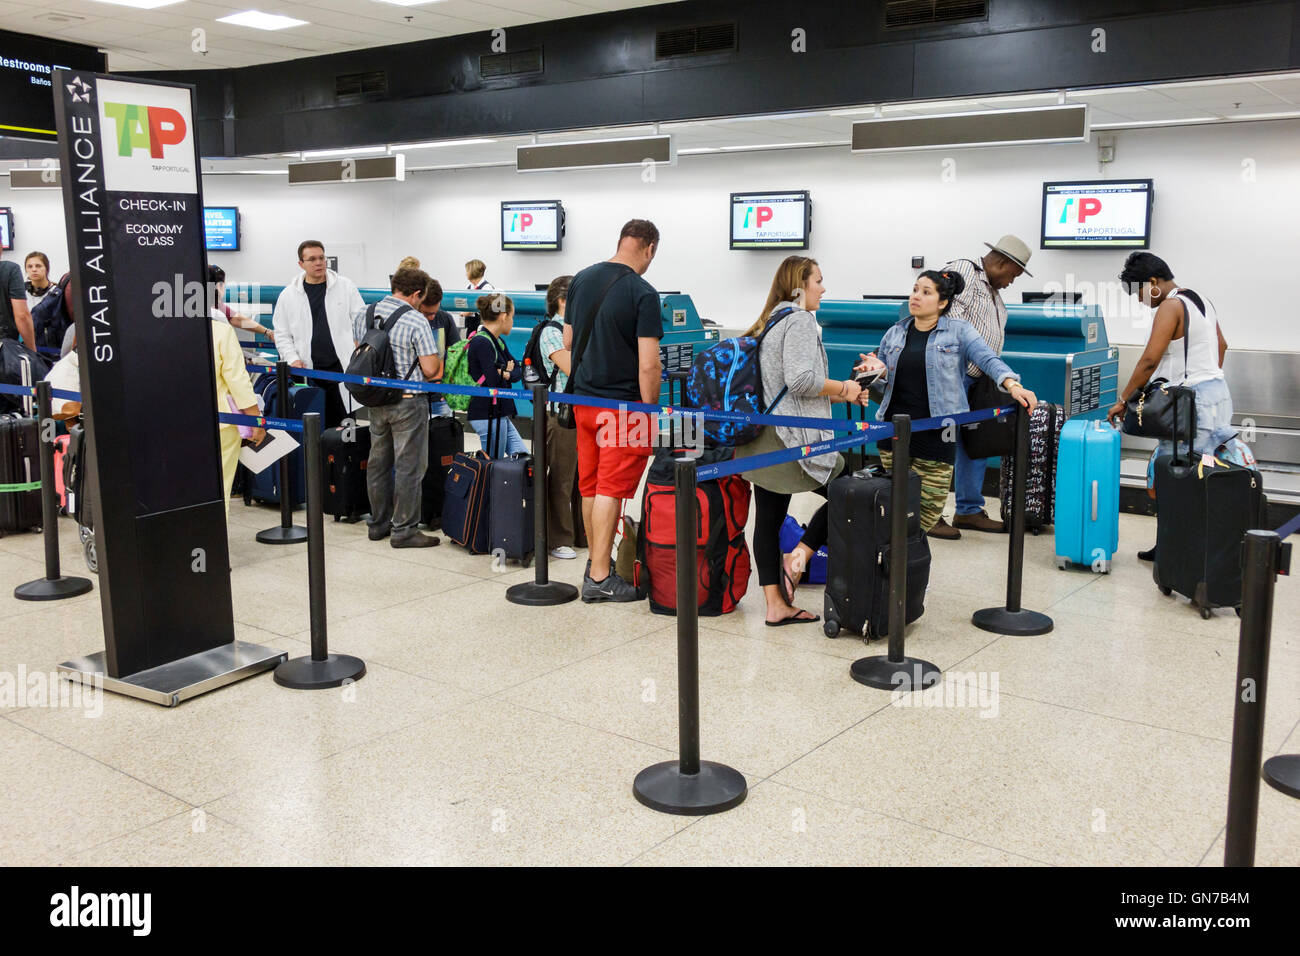 Miami Florida International Airport MIA,aviation,terminal,TAP Portugal Airline Company,Portuguese carrier,ticket counter,agent,job,Black adult,adults, Stock Photo